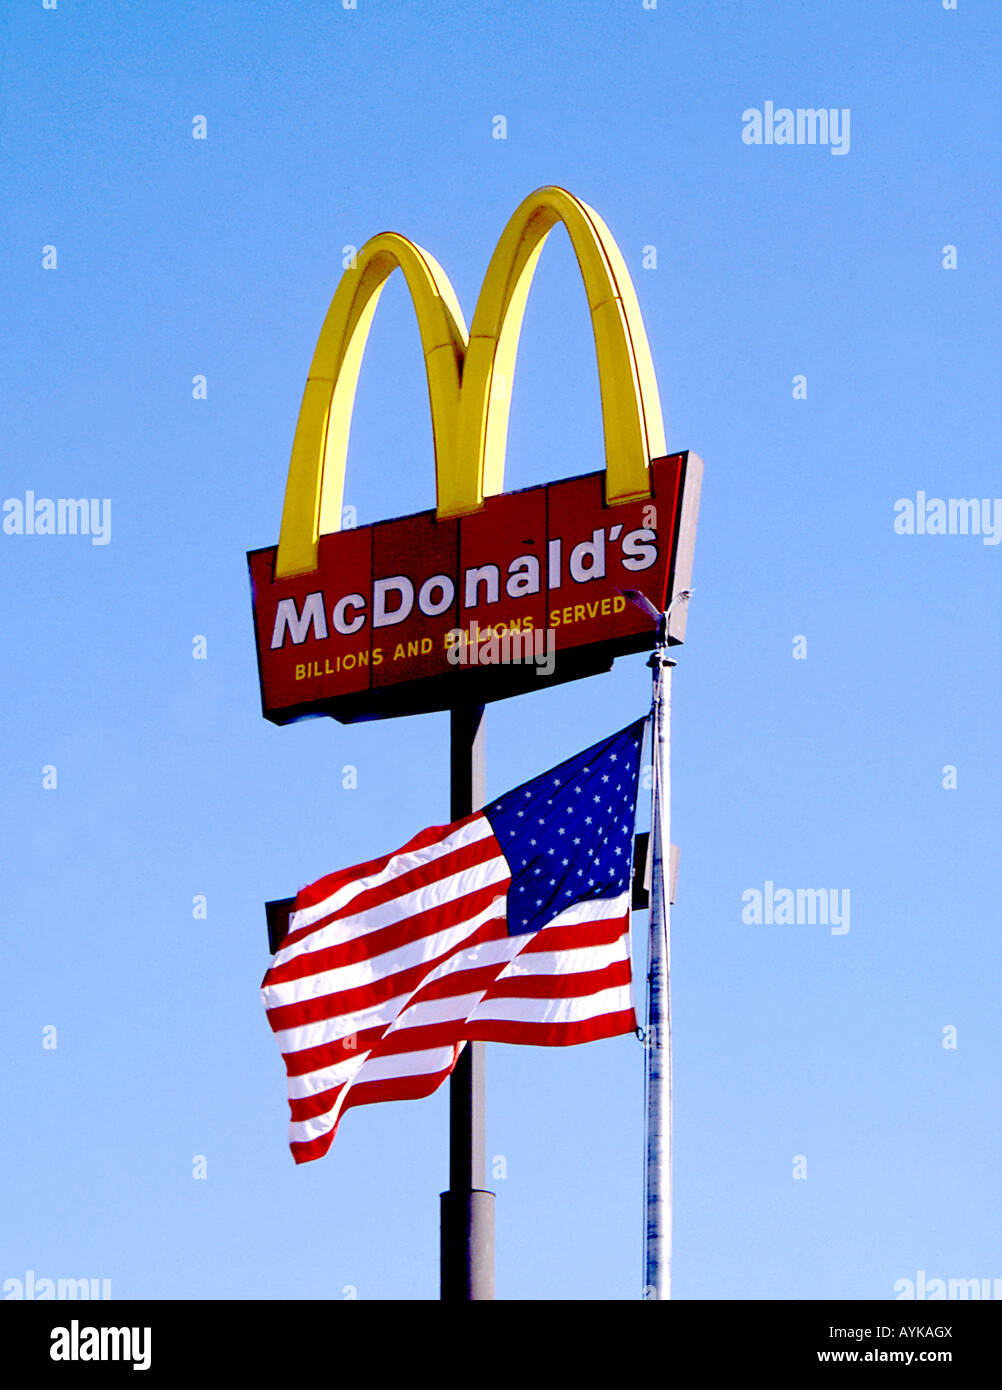 Billions of burgers sold according to this McDonald's sign in USA Stock Photo